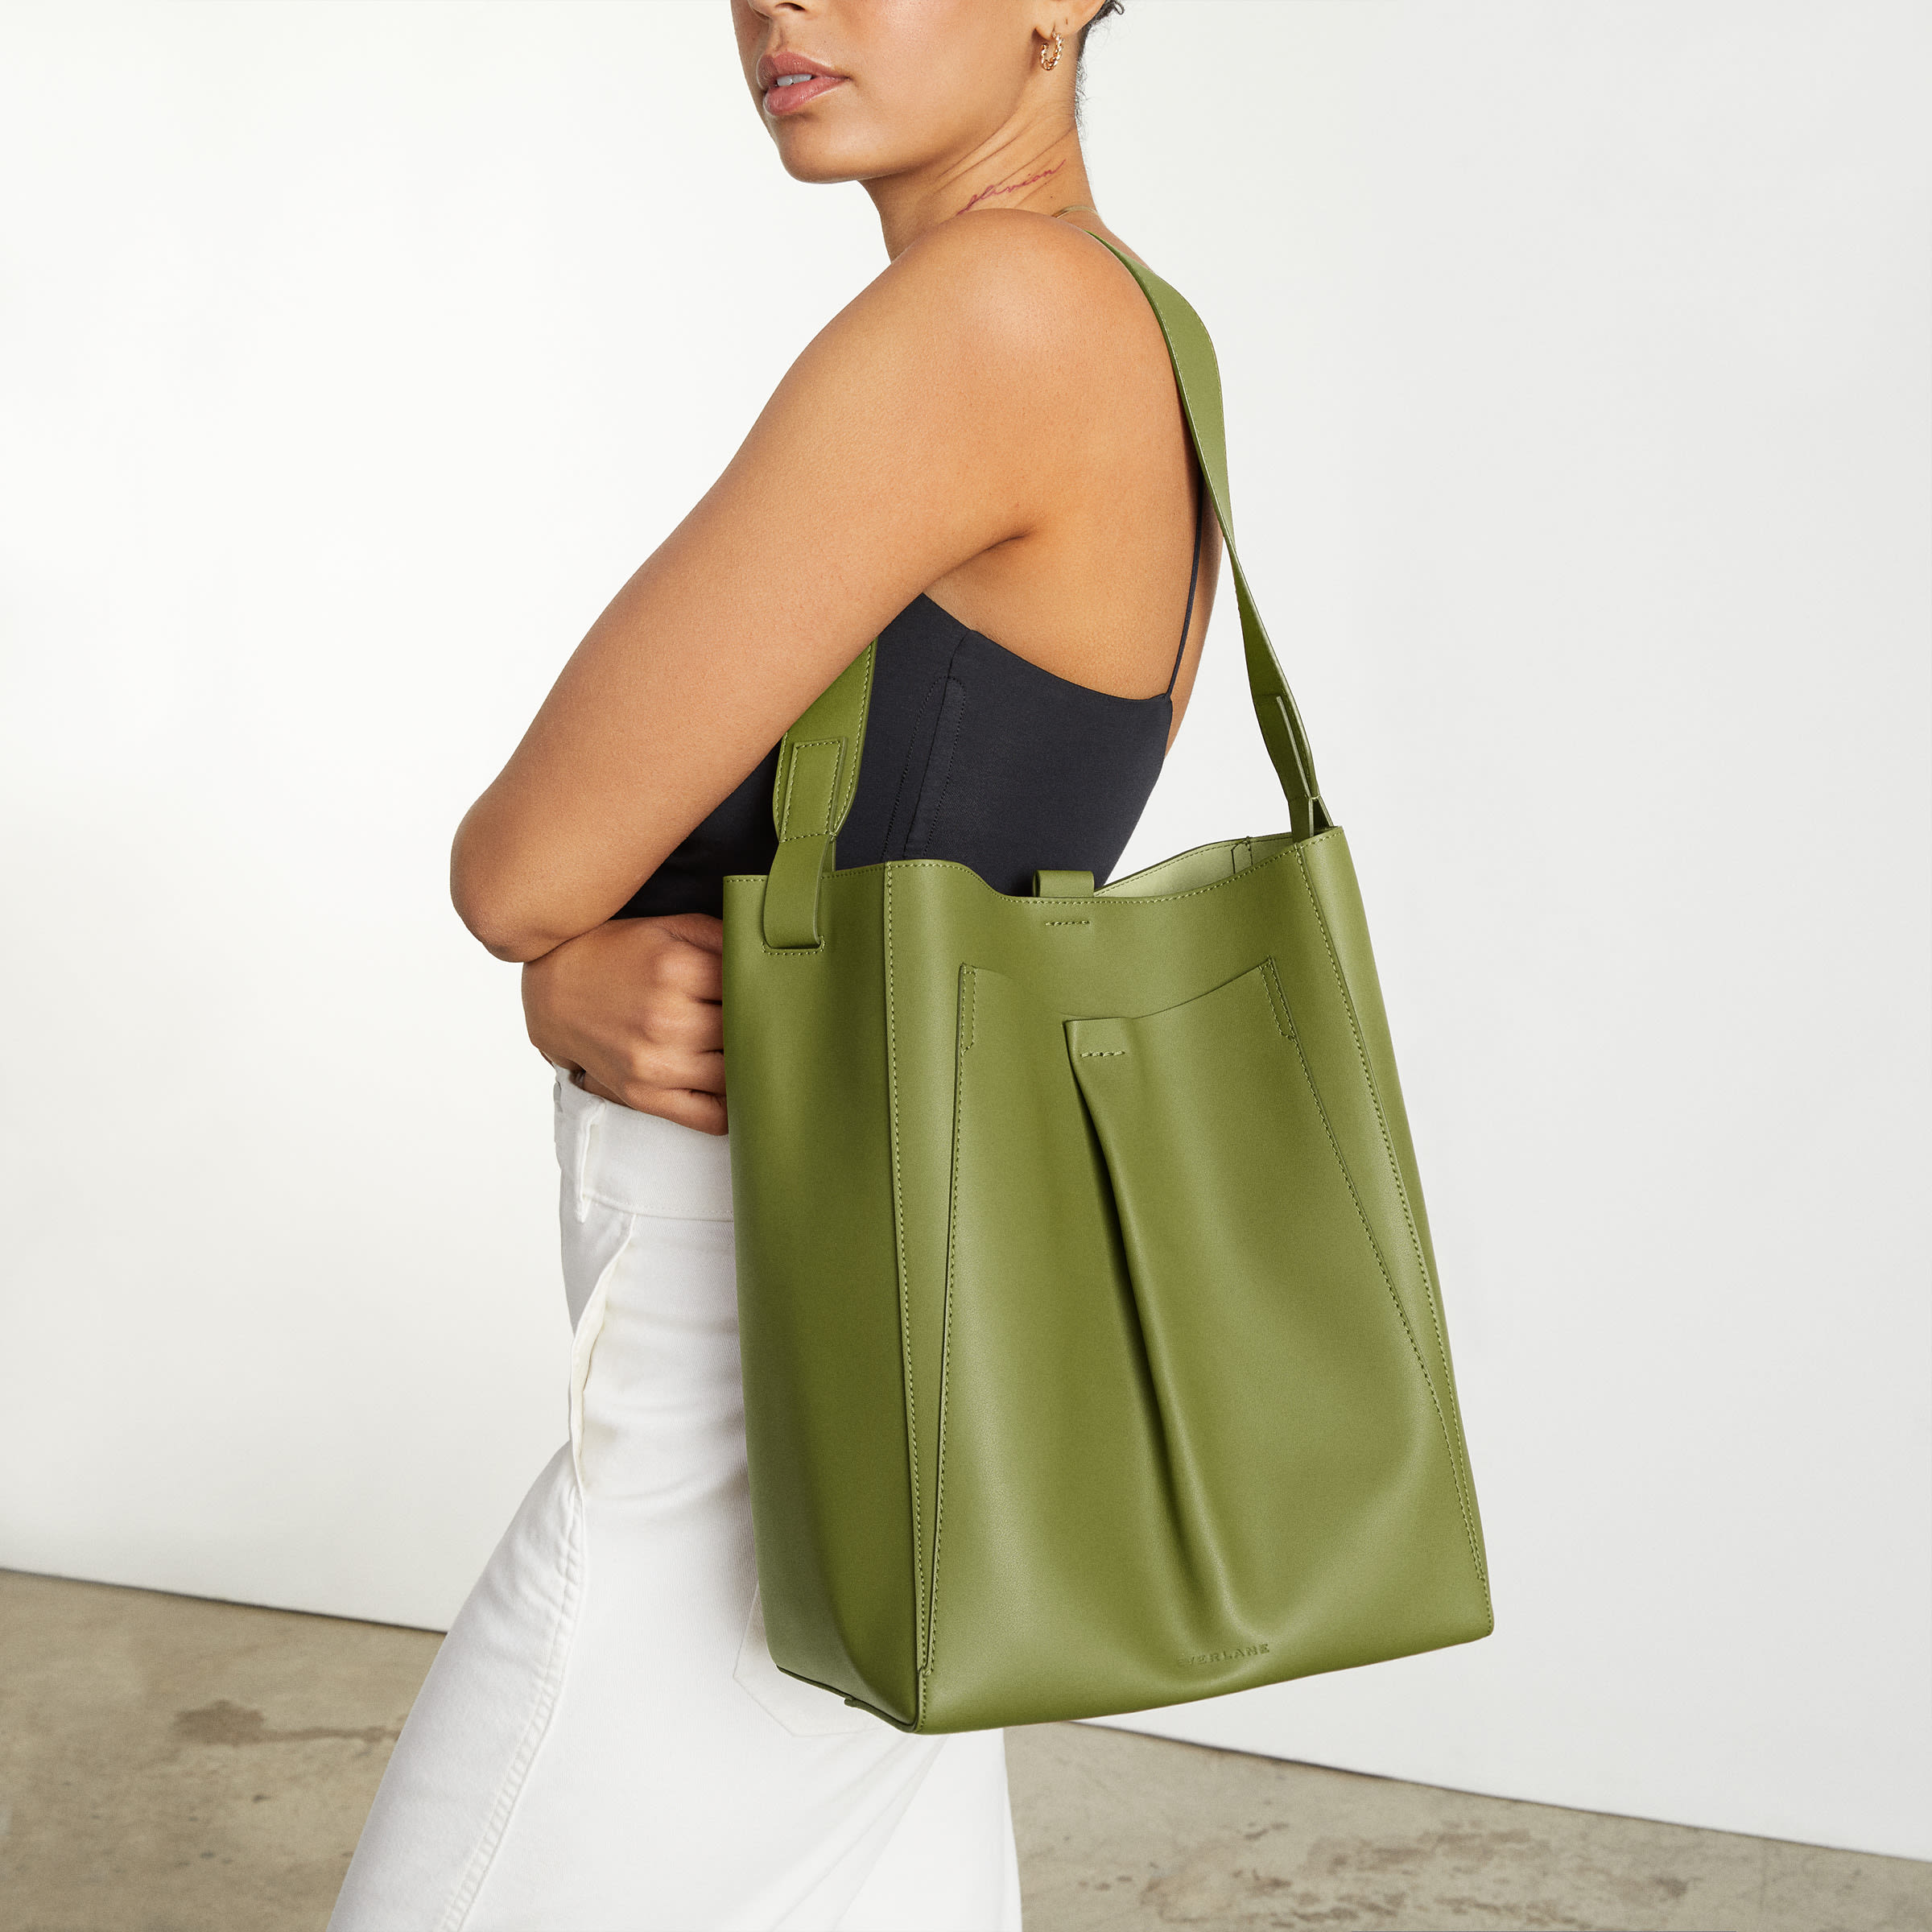 Women's Shoes, Bags & Accessories – Everlane